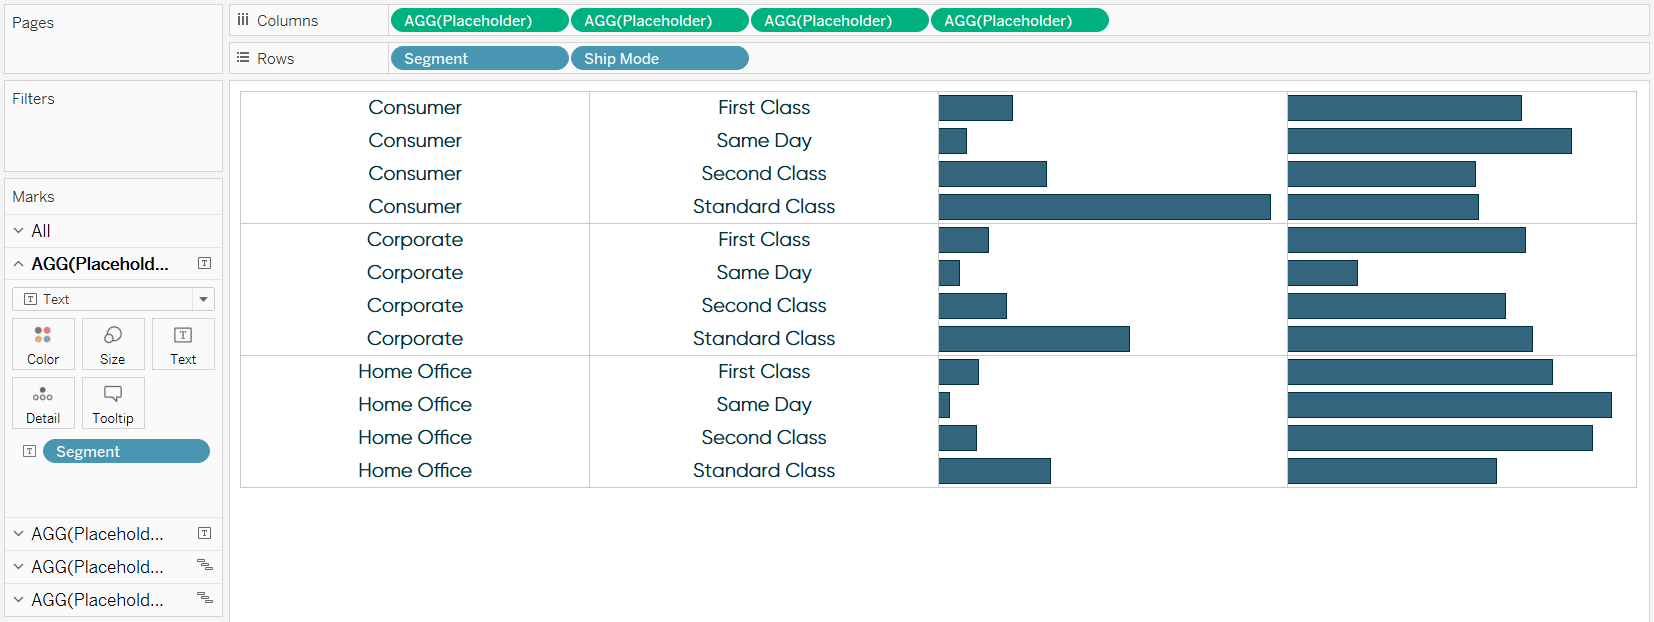 Tableau Bar Chart Using the Placeholder Trick with Formatting